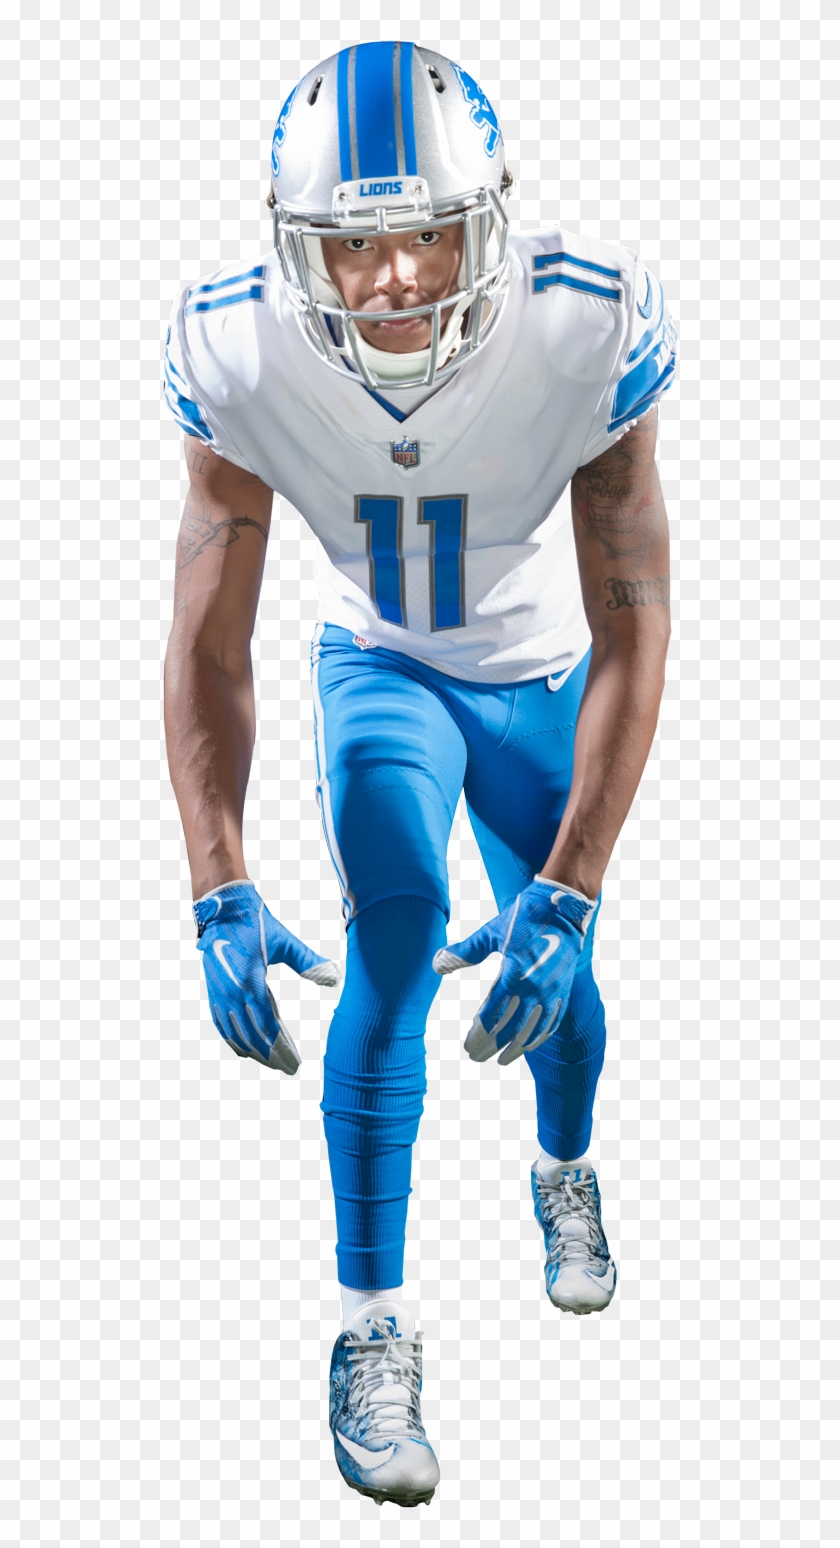 The Lions Began Wearing Separate Colored Uniforms On - The Lions Began Wearing Separate Colored Uniforms On #300344